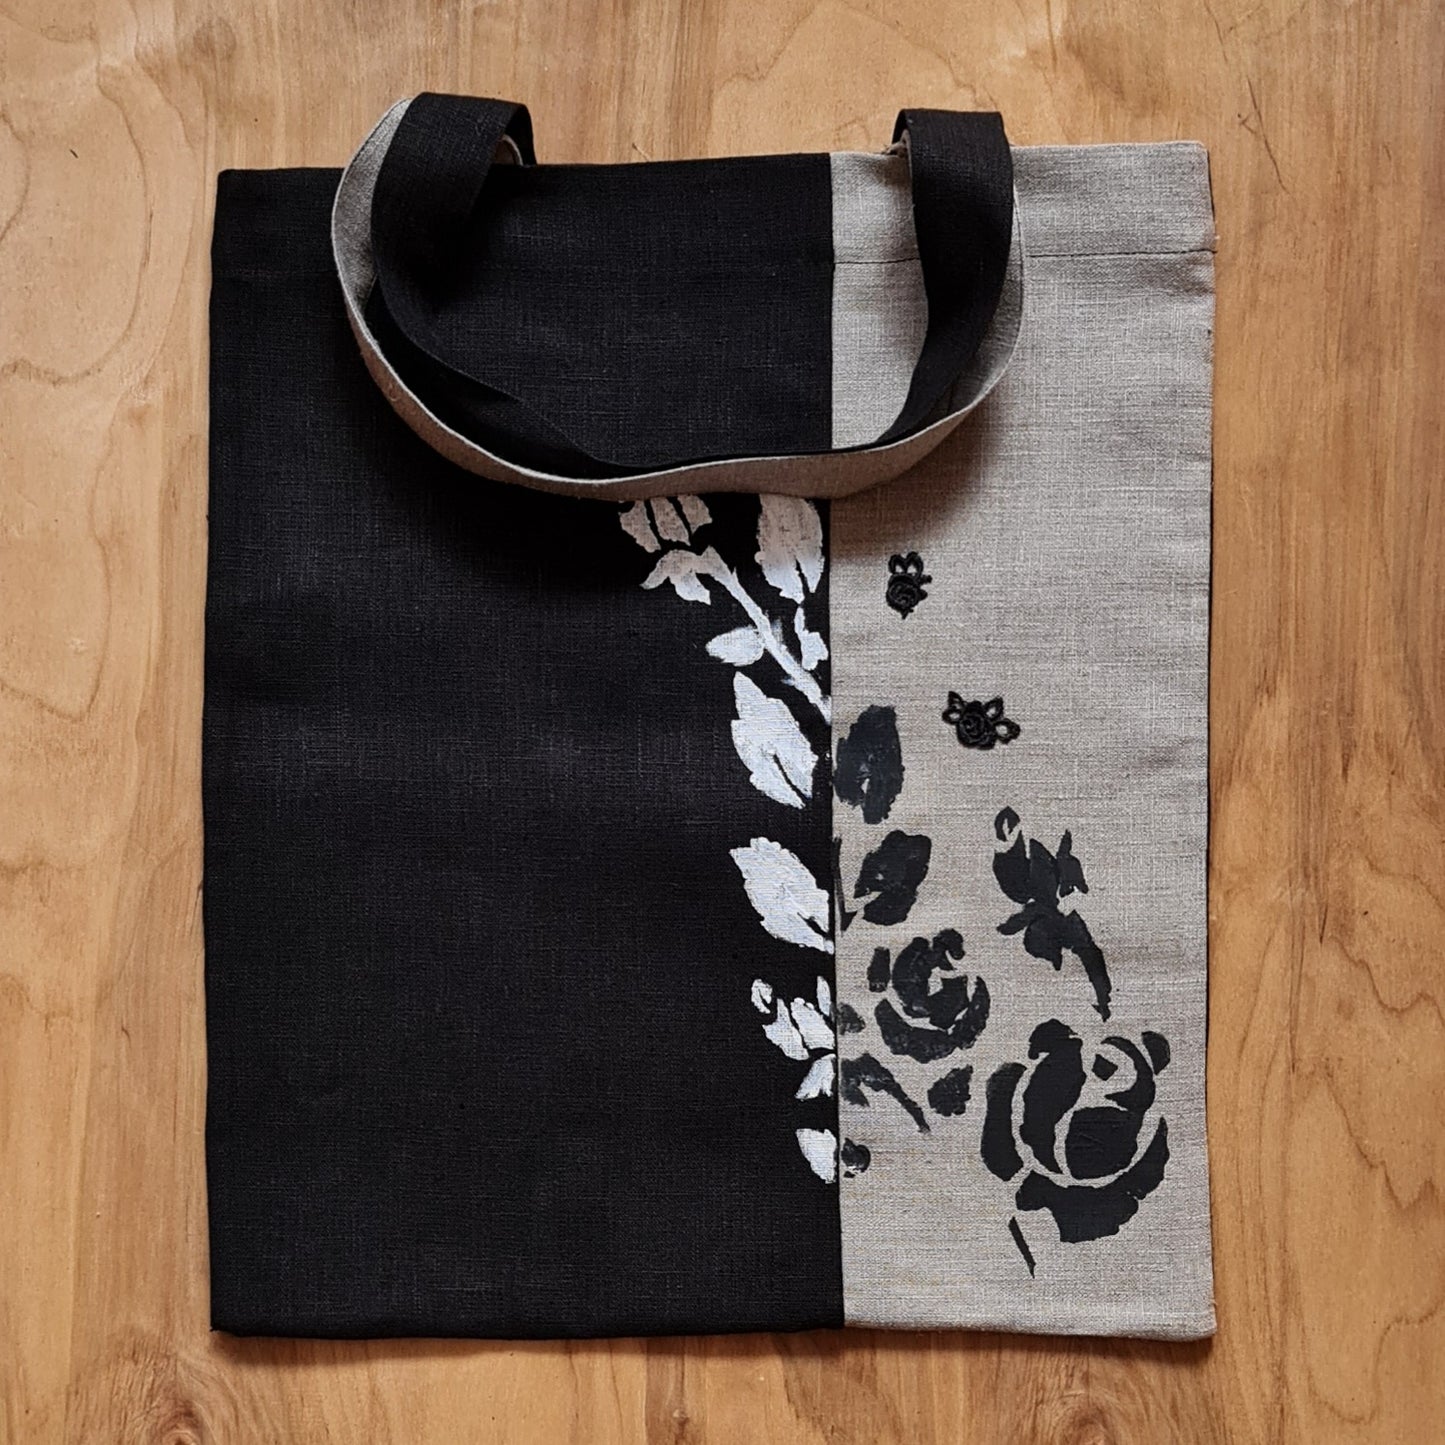 Undyed and black linen fabric shopping bag/bag with vertical 2-strip fabric change / black and white appliqué flower motif and shoulder handles (ZMI)